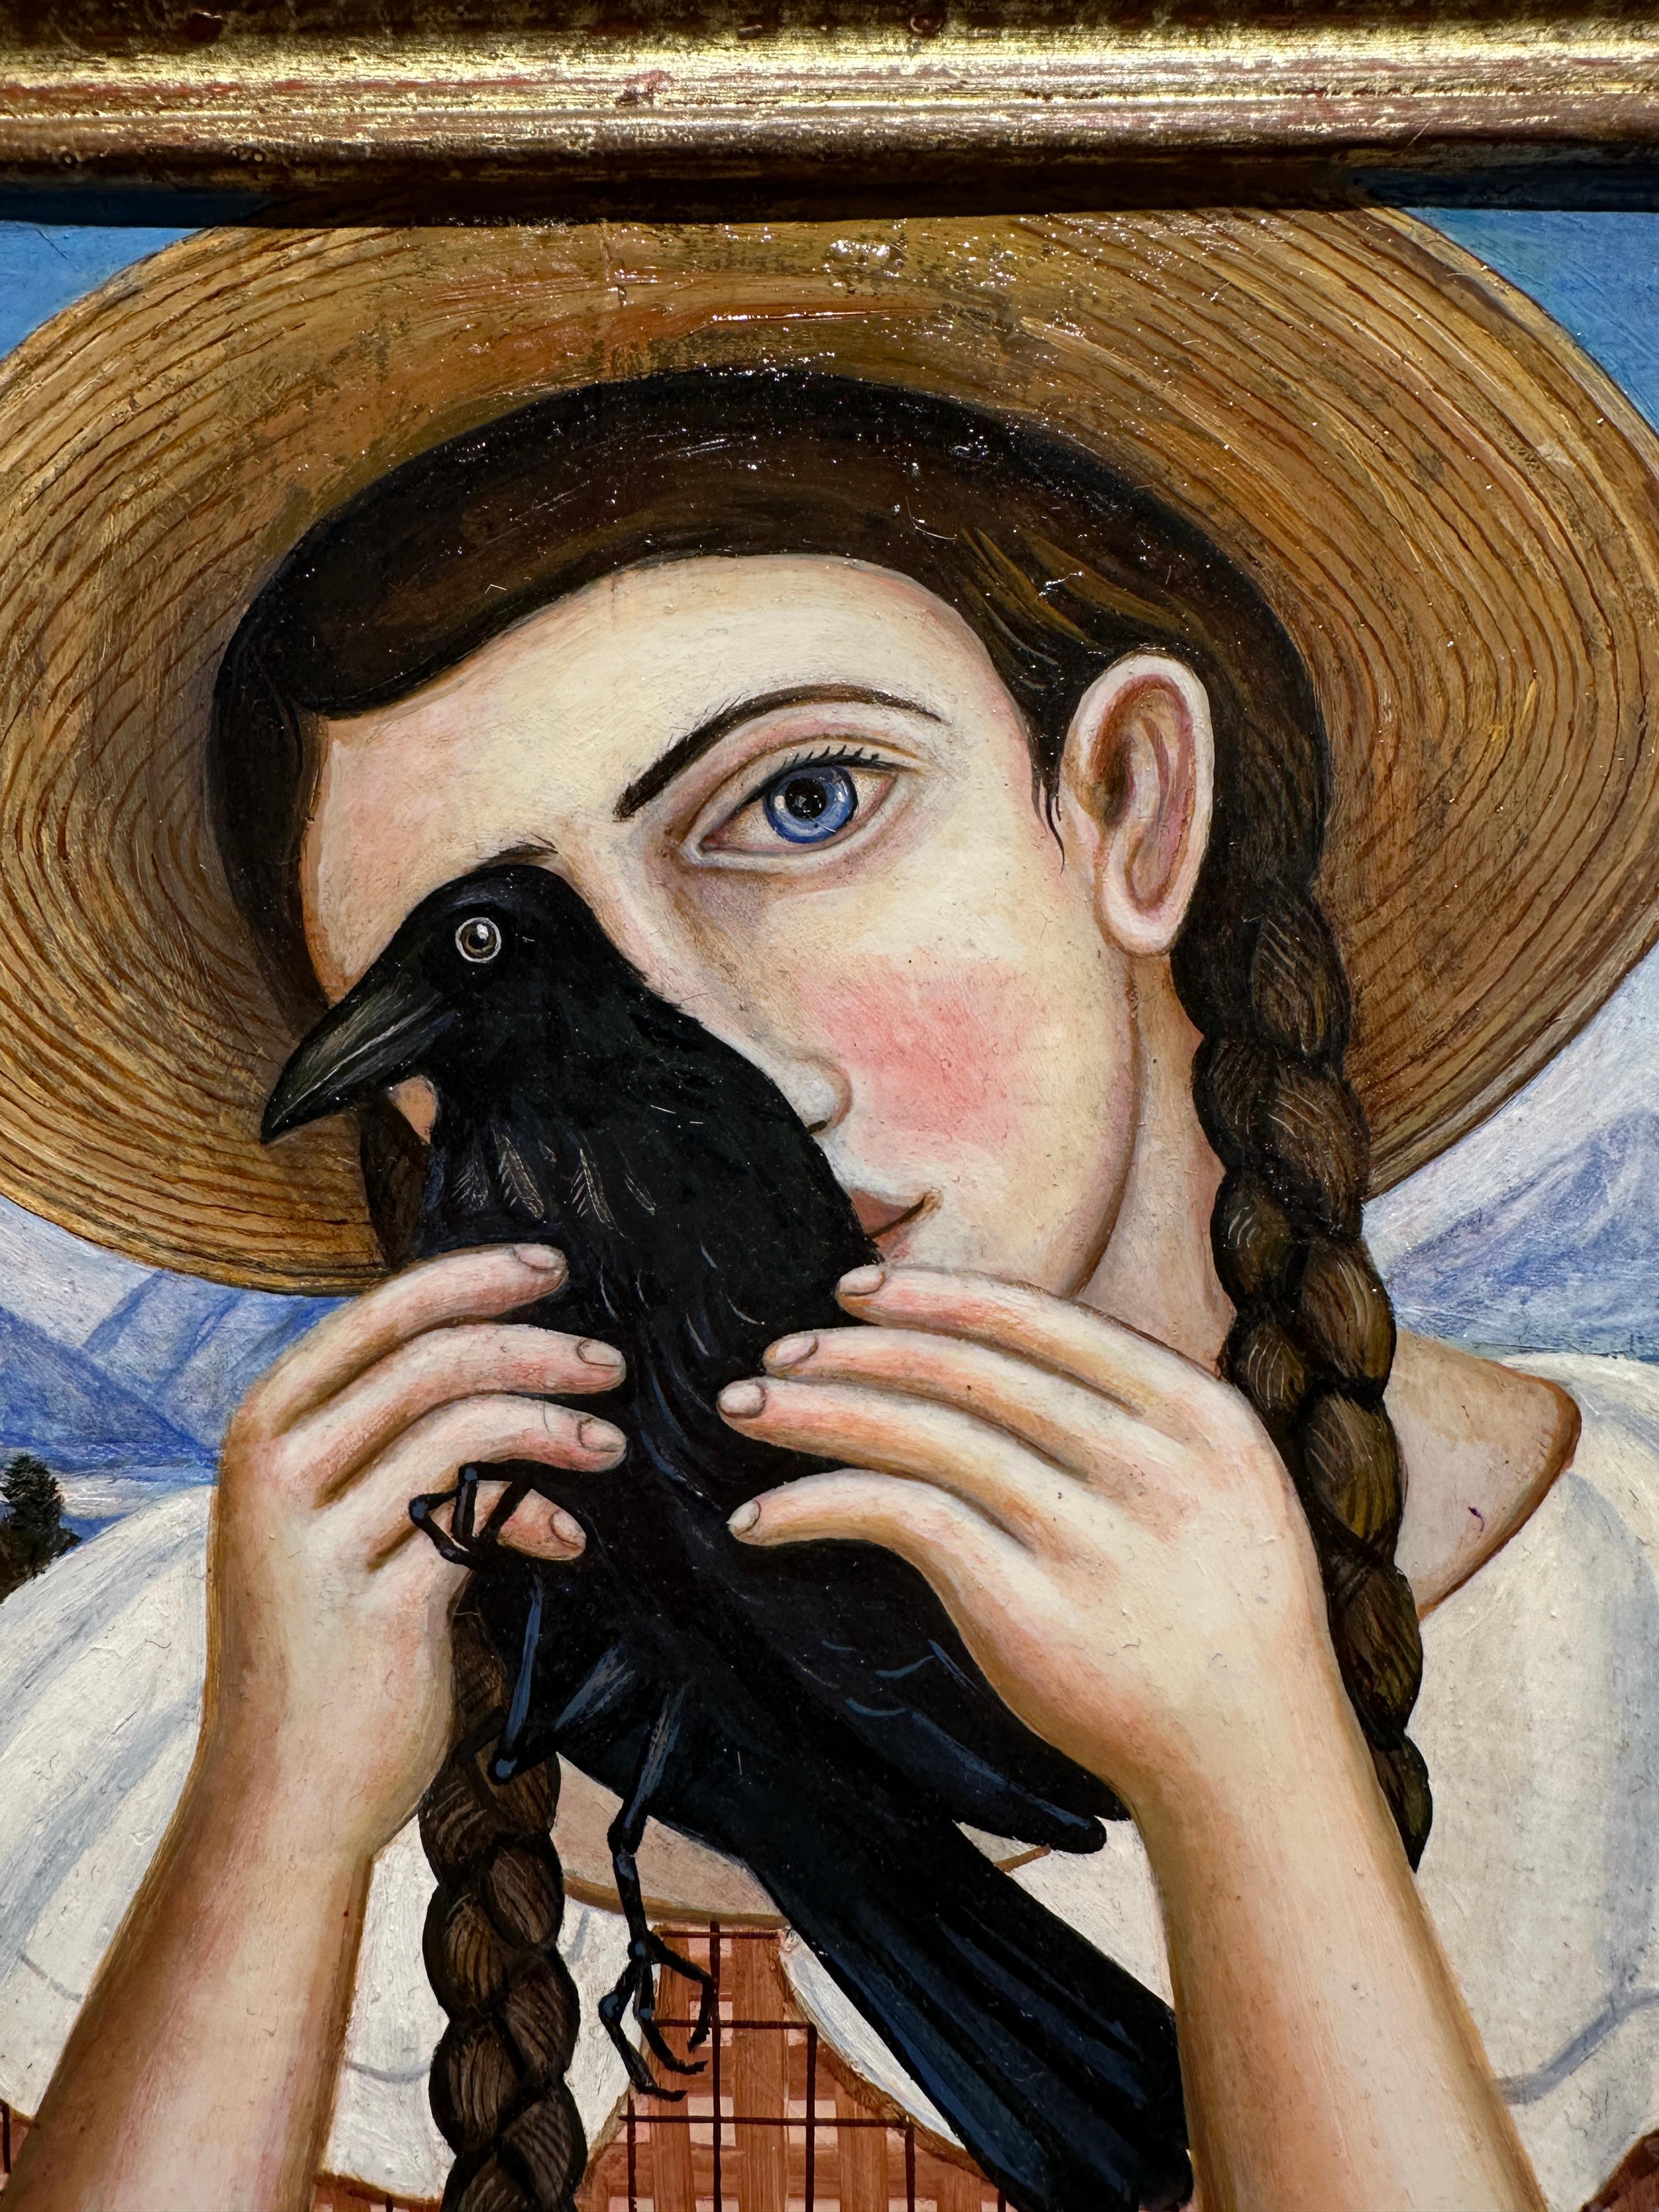 In ancient Rome and Augur was a religious official sought to interpret signs, especially the behavior of birds in order to predict divine approval or disapproval of proposed actions. In this painting, a wise looking young girl holds a crow in her